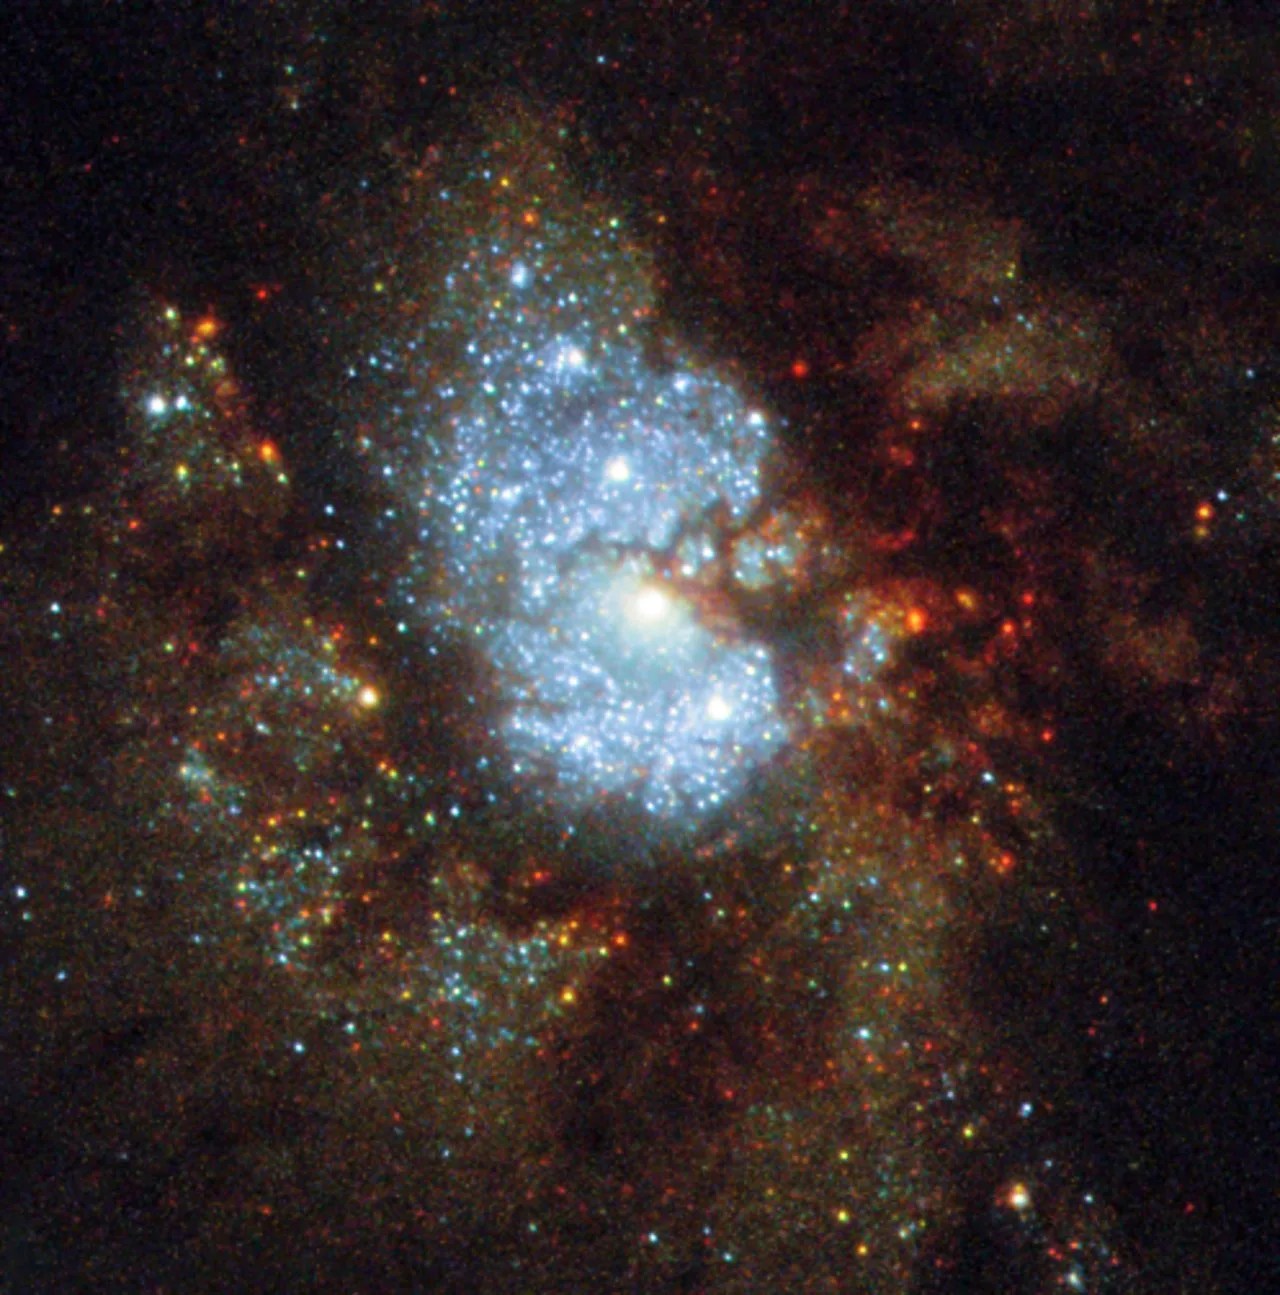 Bright blue stars encircled by dust